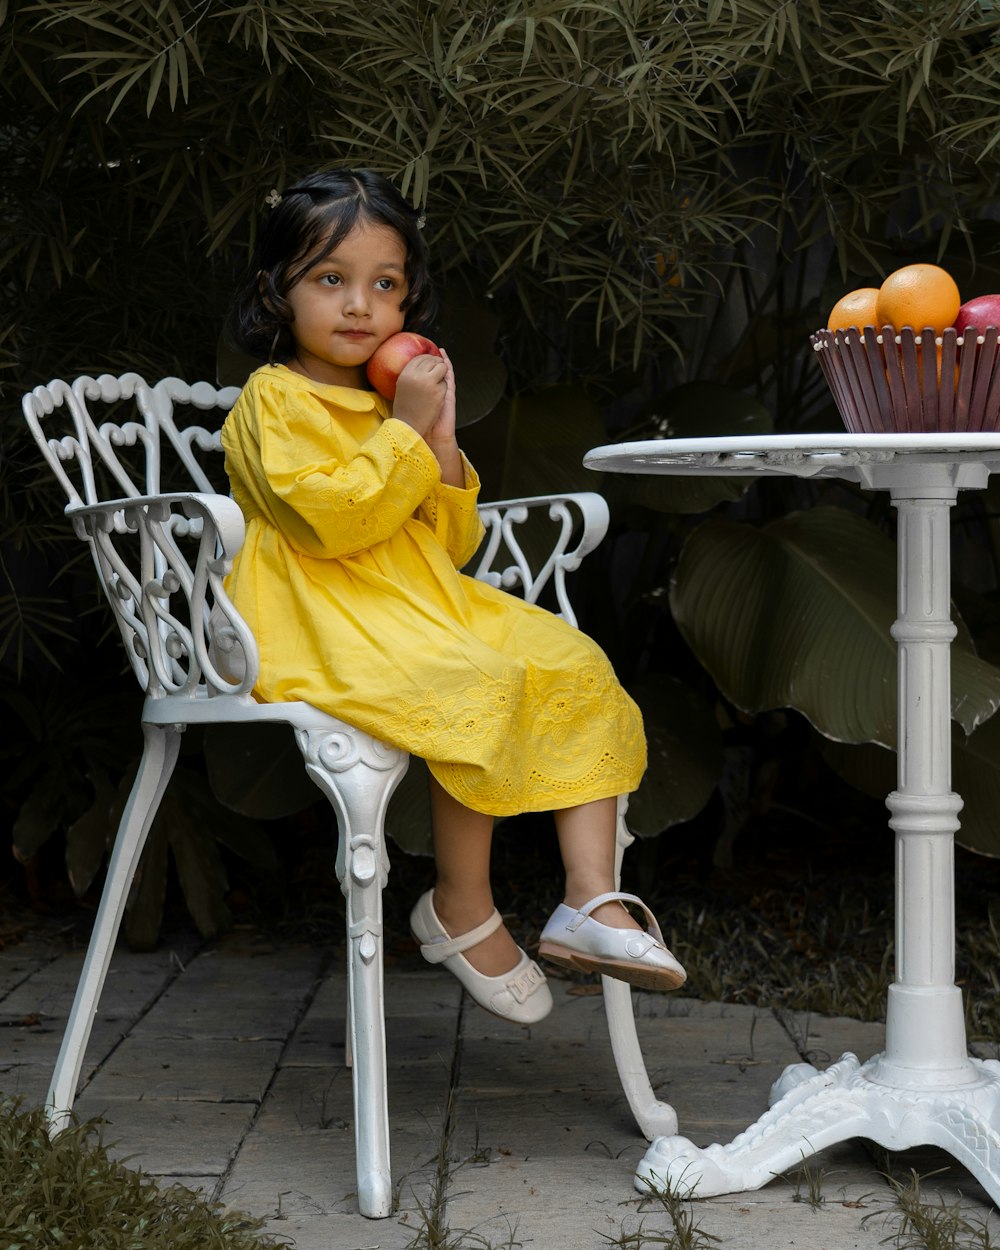 a little girl sitting at a table eating an apple